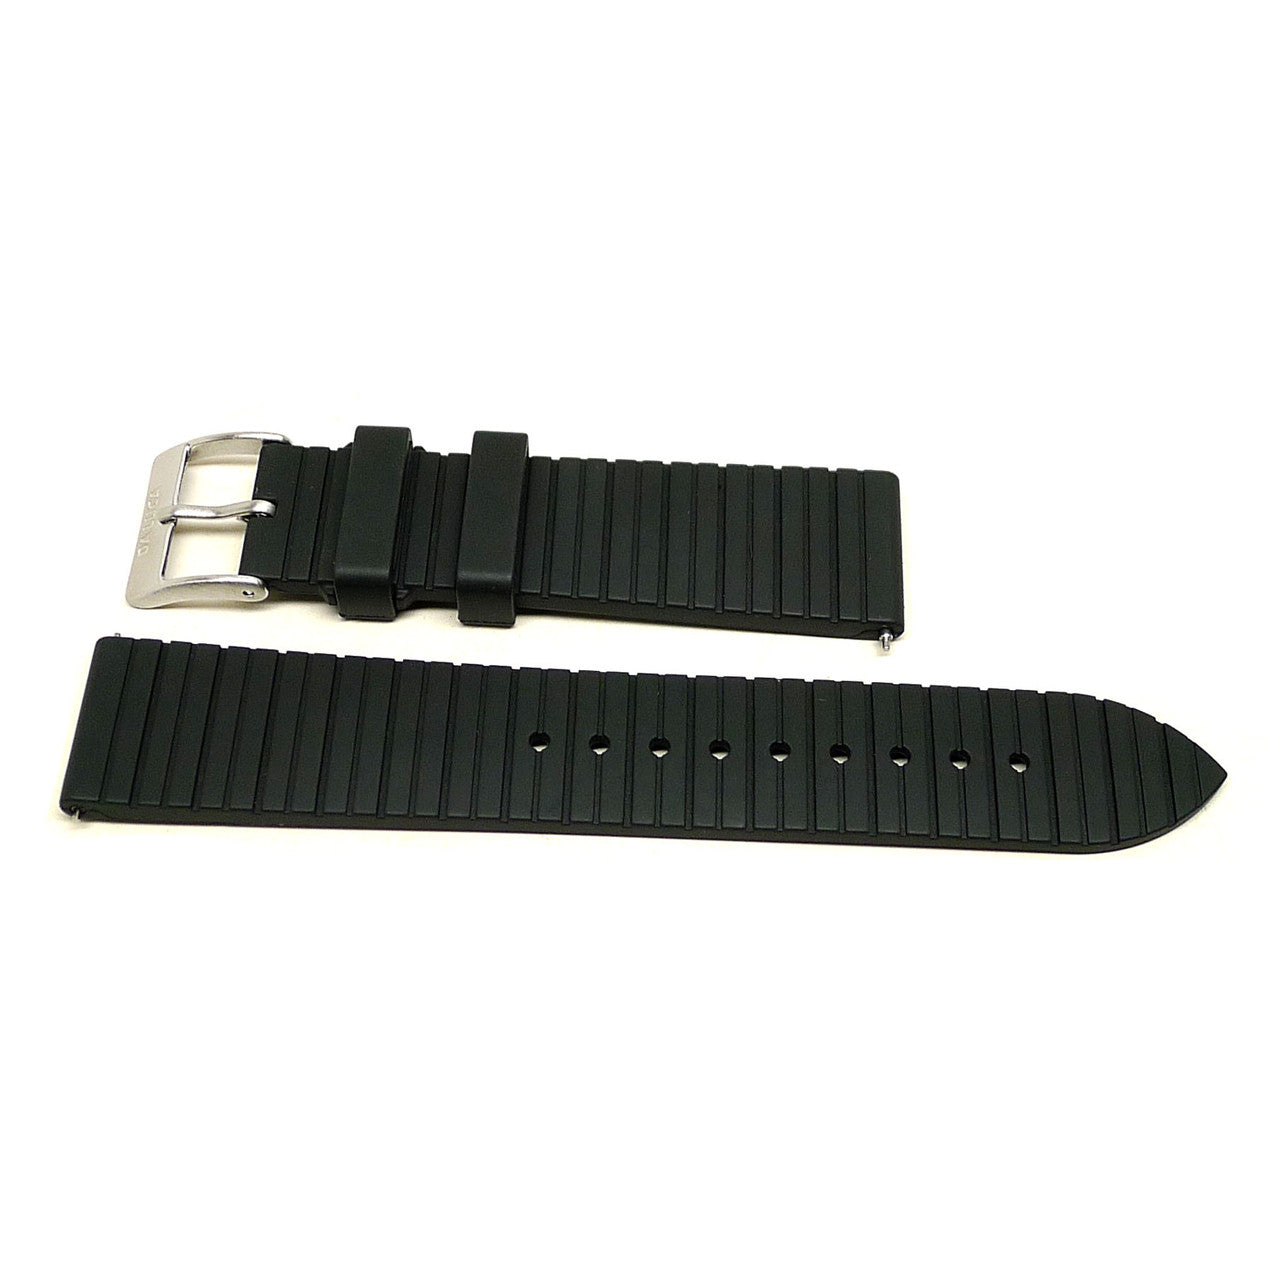 Racer Rubber FKM Watch Strap In Black by DaLuca Straps.